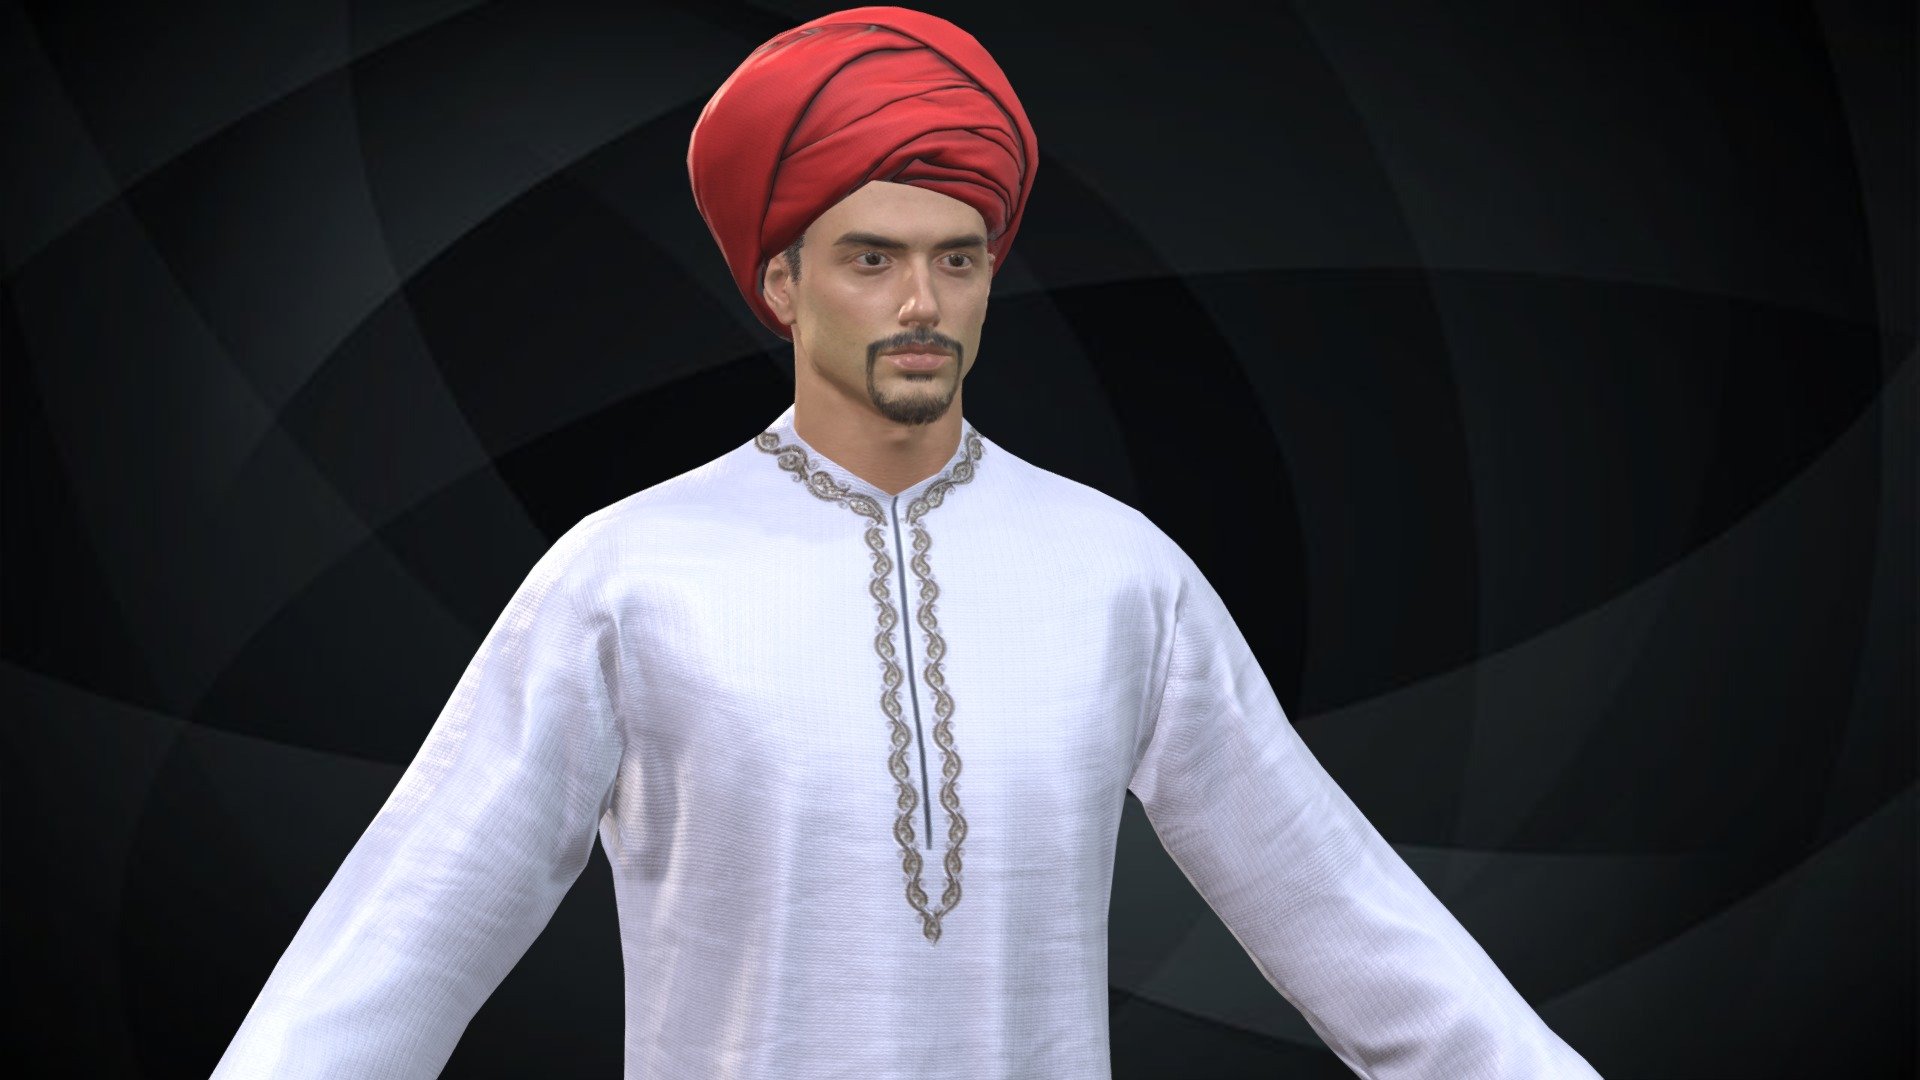 High-quality AAA game-ready 3D Male Character

The version of Maya is 2019.Blender file 2.83(unrigged)

Compatible with Unity and Unreal or any real time renderer Optimized and game ready

Materials: 8 Total Materials (Face,Body, Eye,Eyebrows,Eyelashes ,Hair,brows ,cloth,shoes,hat)

Body Under Clothes: Yes

Realtime Hair beard Cards: Yes

Textures: Face 4096.Body 4096. Eyes 1024 .Eyebrows 2048.  Hair 4096. cloth(2colorways) 2048 .hat2048 hair beard 4096.

The skin uses the Specular pbr texture , and the equipment part uses the metalness pbr texture .

The compressed package contains the maya file, the FBX file, the Marmoset toolbag files,the blender file and all the texture files.

Have a nice day~ - Indian traditional cloth suit for man - Buy Royalty Free 3D model by Vincent Page (@vincentpage) 3d model